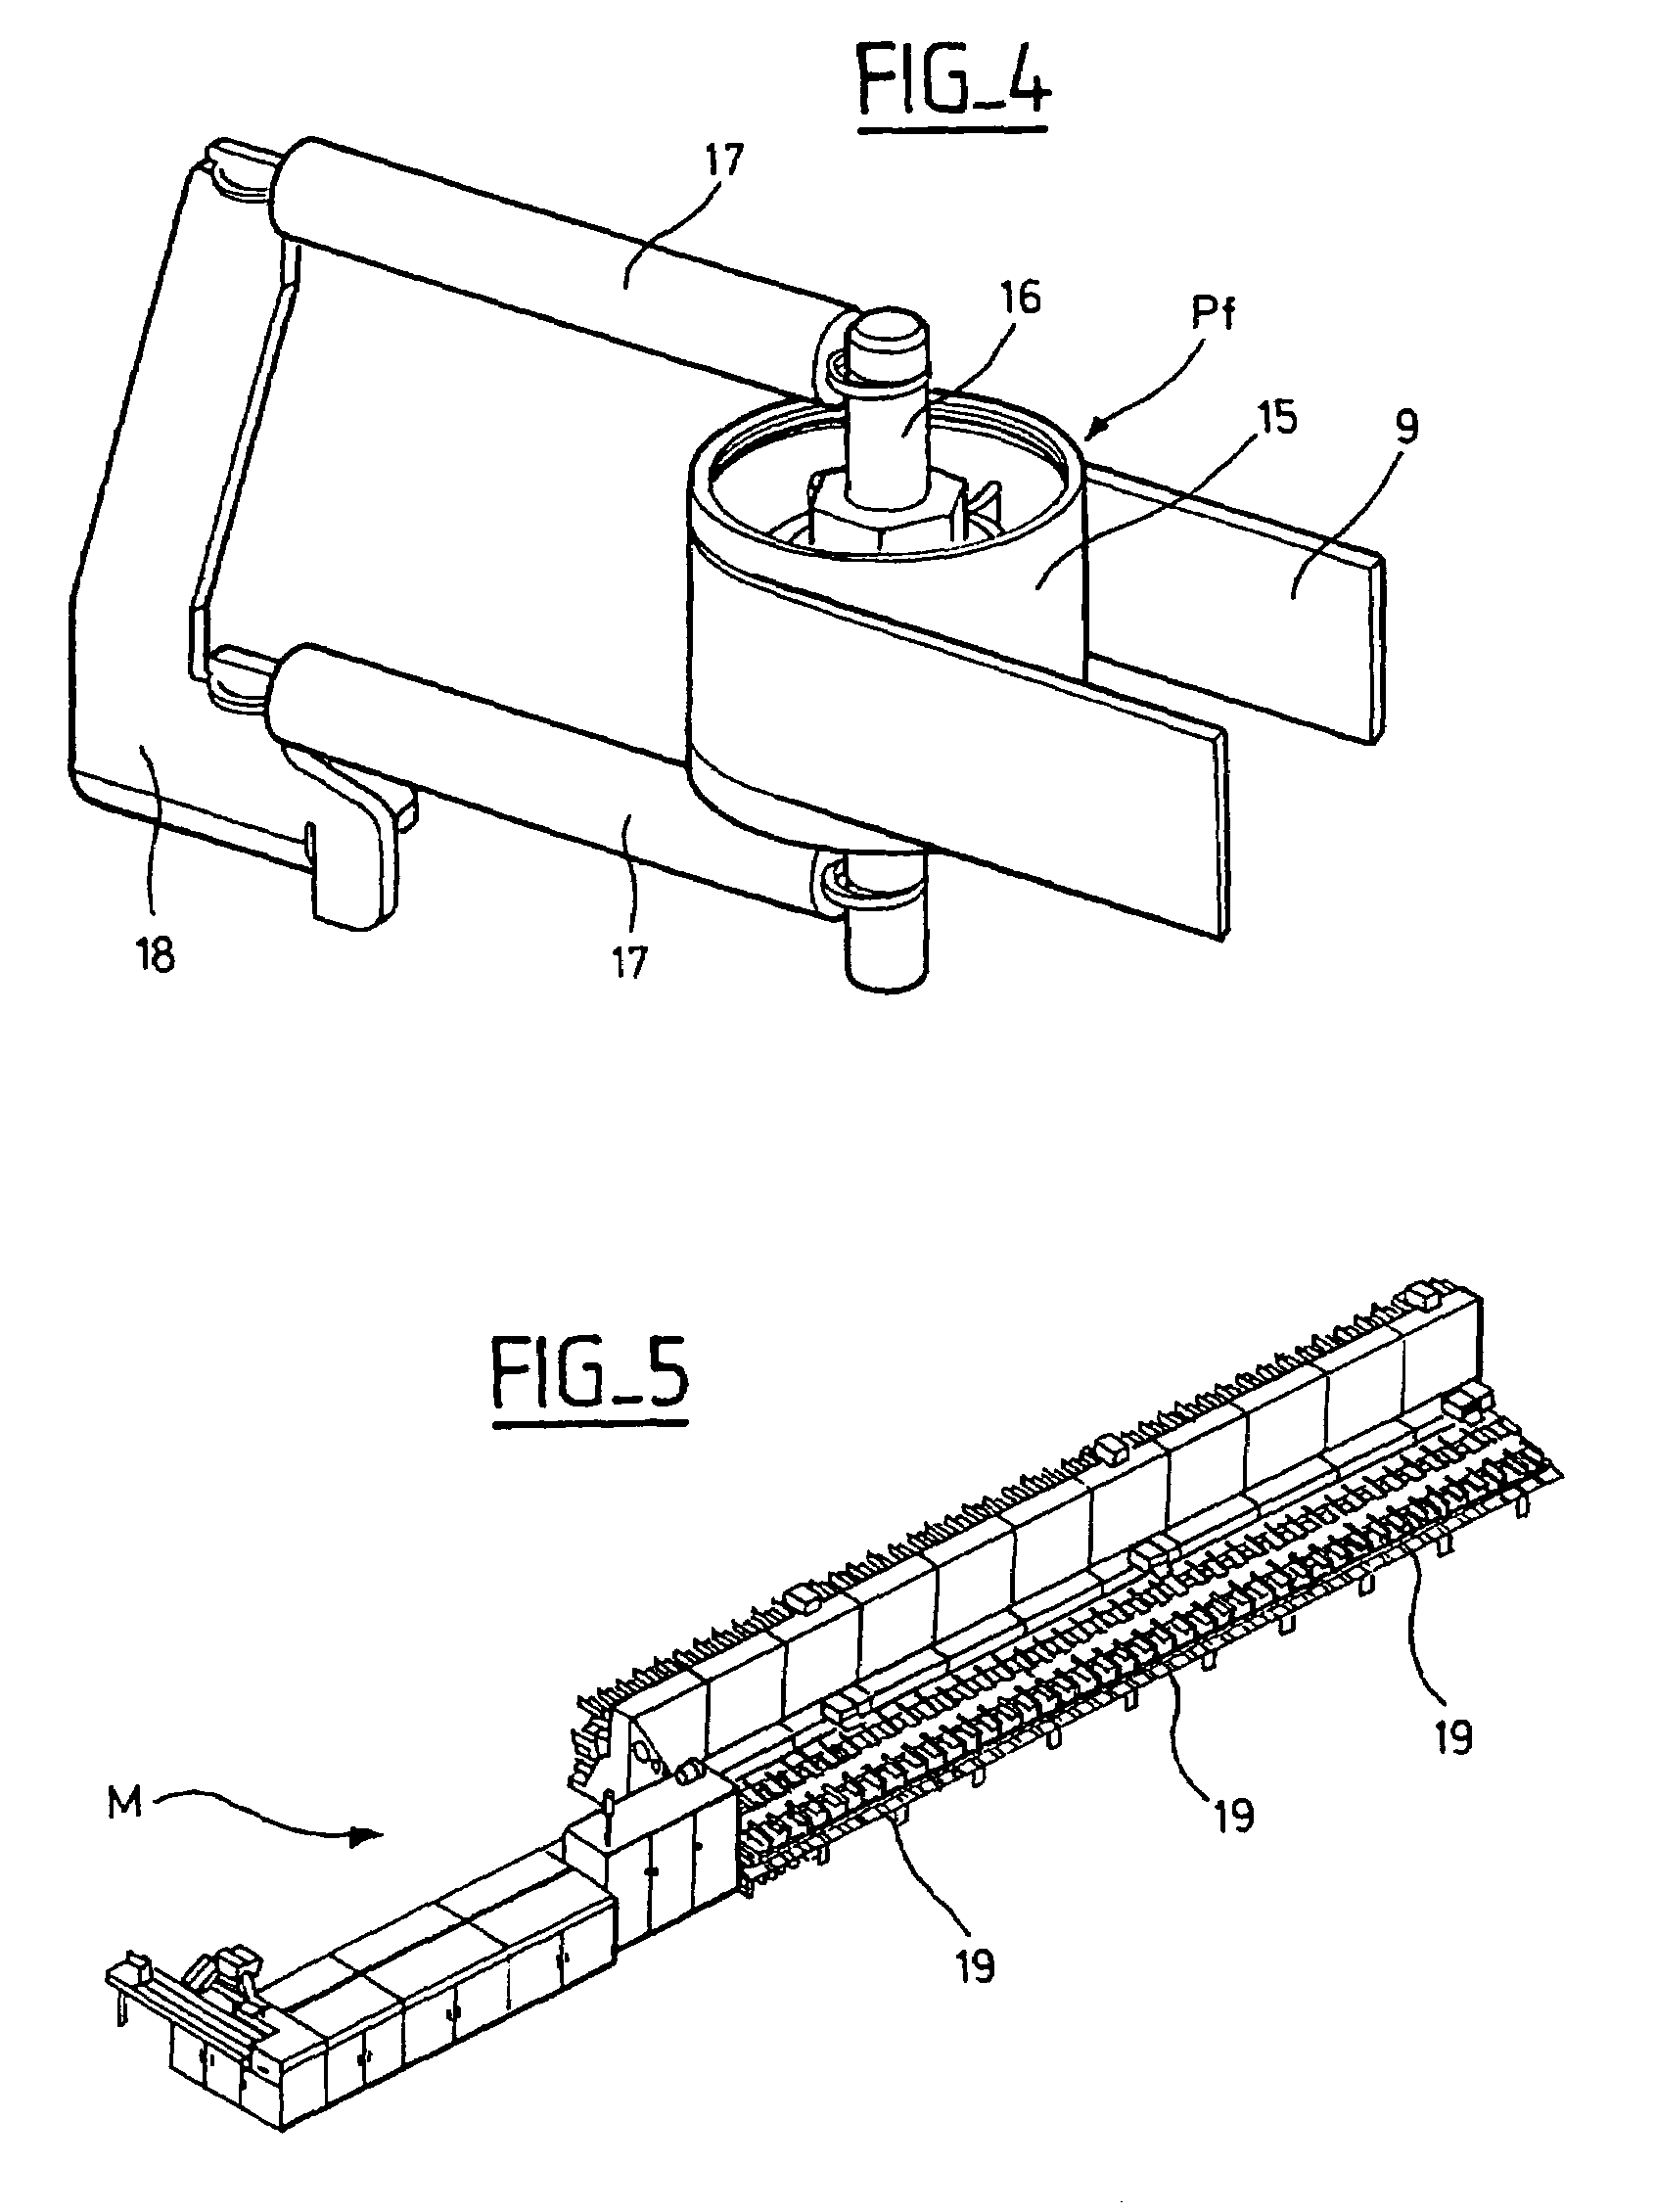 Conveyor apparatus having a twice-twisted belt and a floating-tension pulley